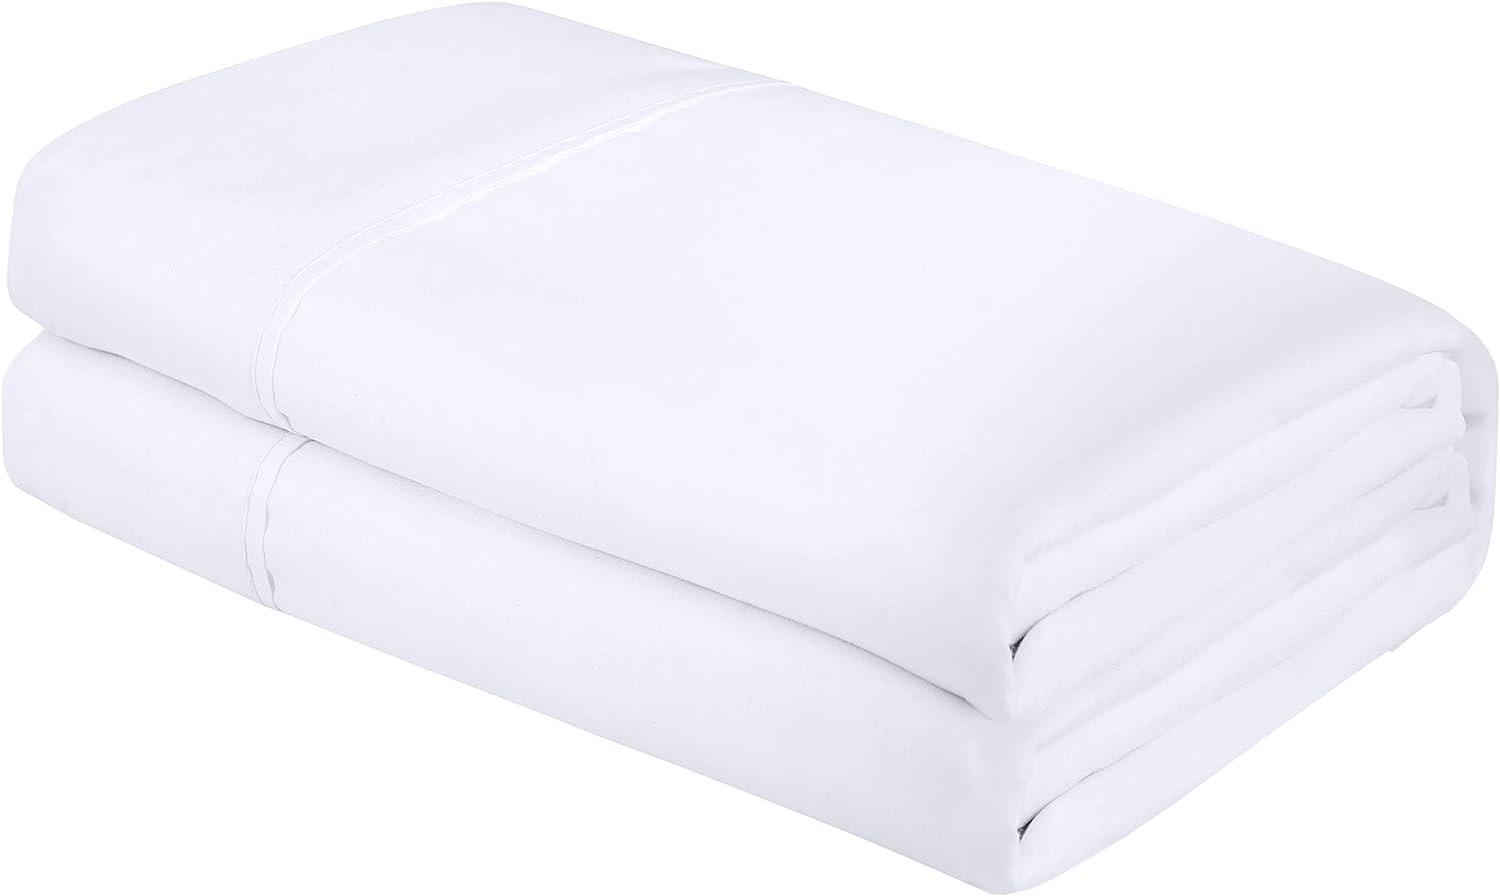 Royale Linens Twin XL Size Flat Sheet Only - Soft & Breathable - Brushed 1800 Microfiber - Wrinkle & Stain Resistant - Hotel Quality Flat Sheet Sold Separately - Top Sheet for Bed - (Twin XL, White)